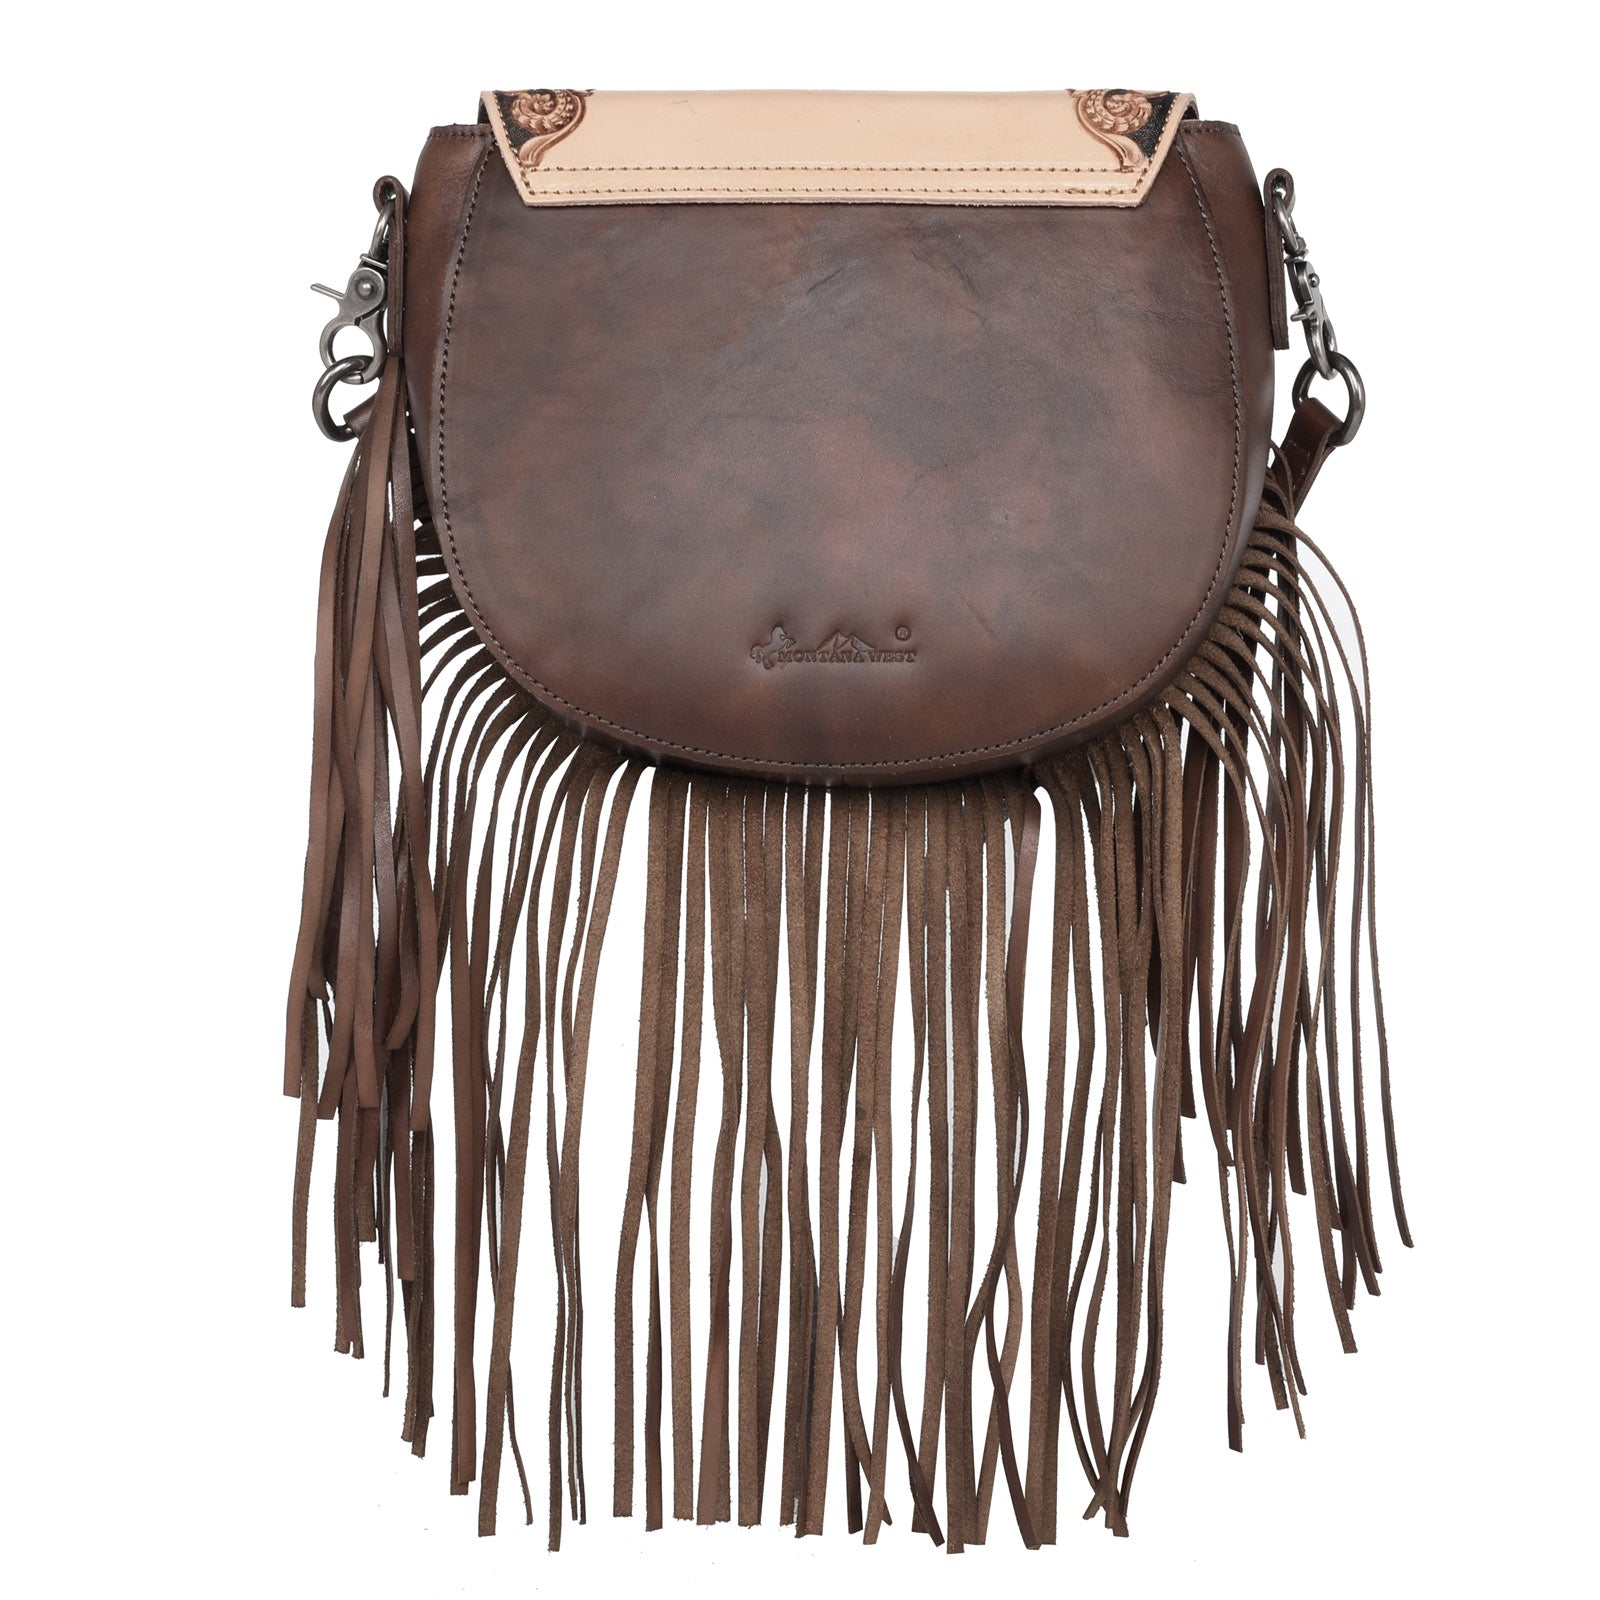 Buy Cowgirl Trendy Western Style Cowgirl Fringe Concealed Purse Conchos  Totes Country Women Handbag Shoulder Bags Wallet Set (1 Brown Set) at  Amazon.in